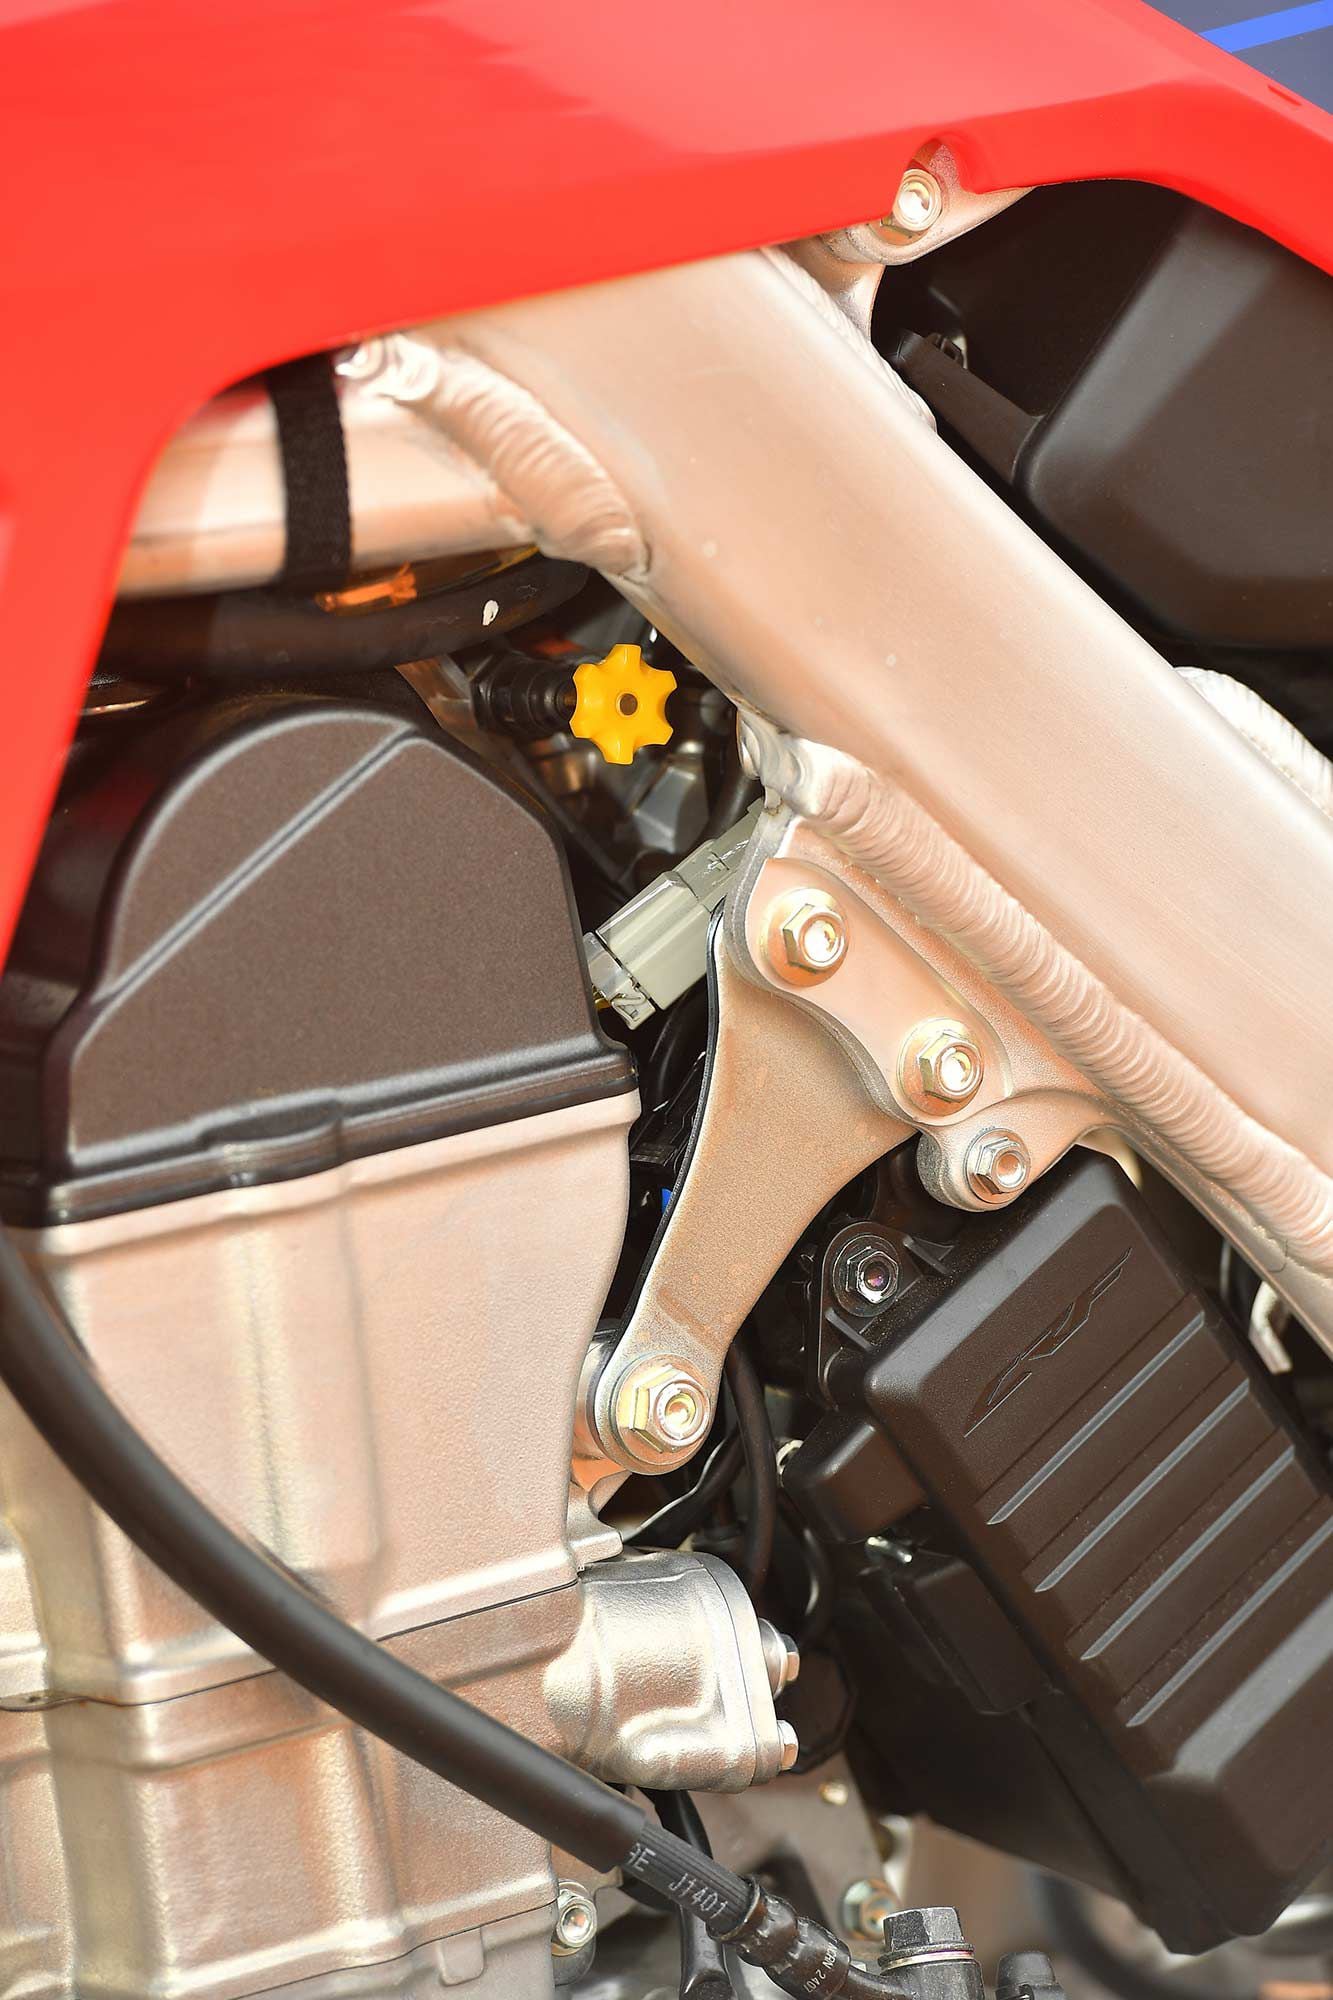 Steel engine hangers replace the previous models’ aluminum counterparts. The yellow choke knob doubles as the idle adjustment screw: Counterclockwise adjustment turns the idle up, clockwise drops the revs and lowers the idle. The battery is tucked neatly behind the black CRF logo’d plastic cover as well.